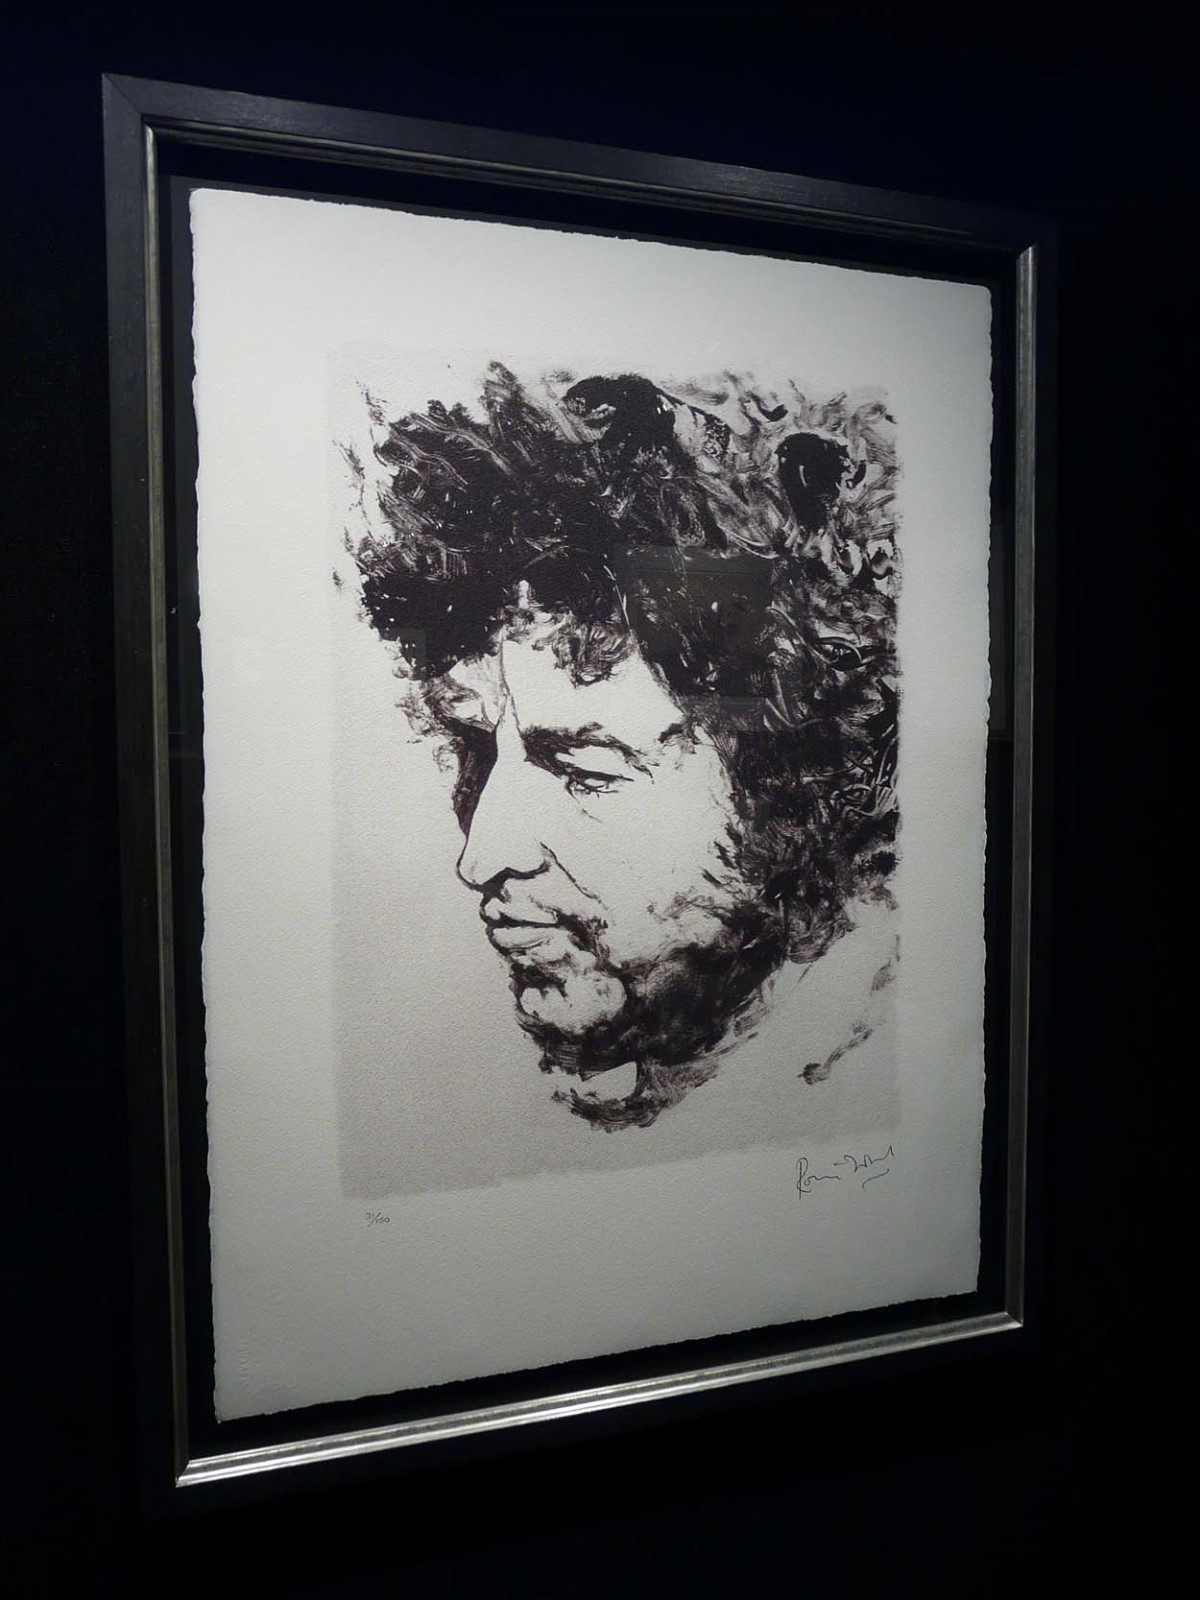 Dylan by Ronnie Wood, Pop | Dylan | Music